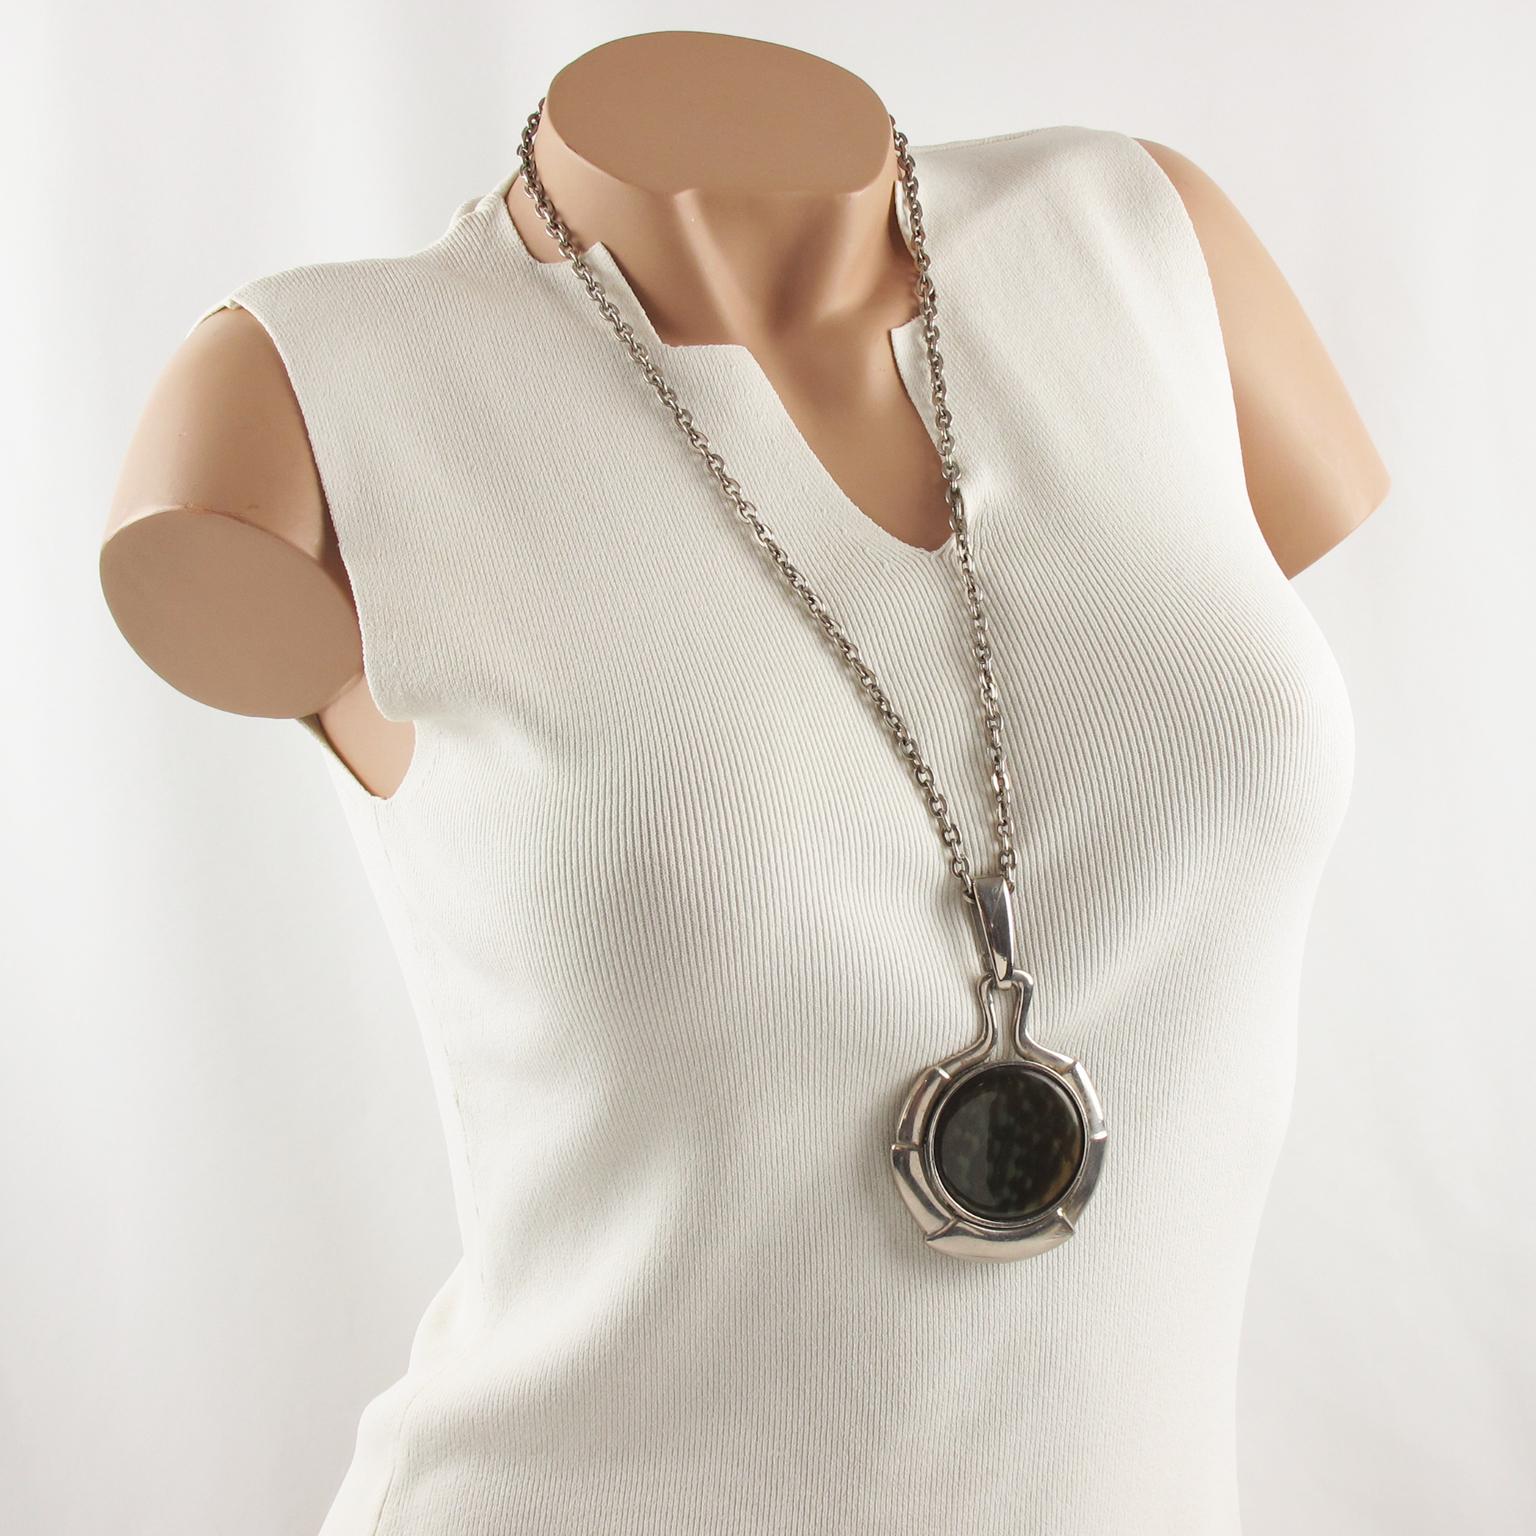 This lovely Space Age Mid-Century modernist pendant necklace features a heavy silvered metal extra-long chain complemented with an oversized silvered metal disk pendant. The pendant is topped with a large resin flat cabochon in iridescent green and